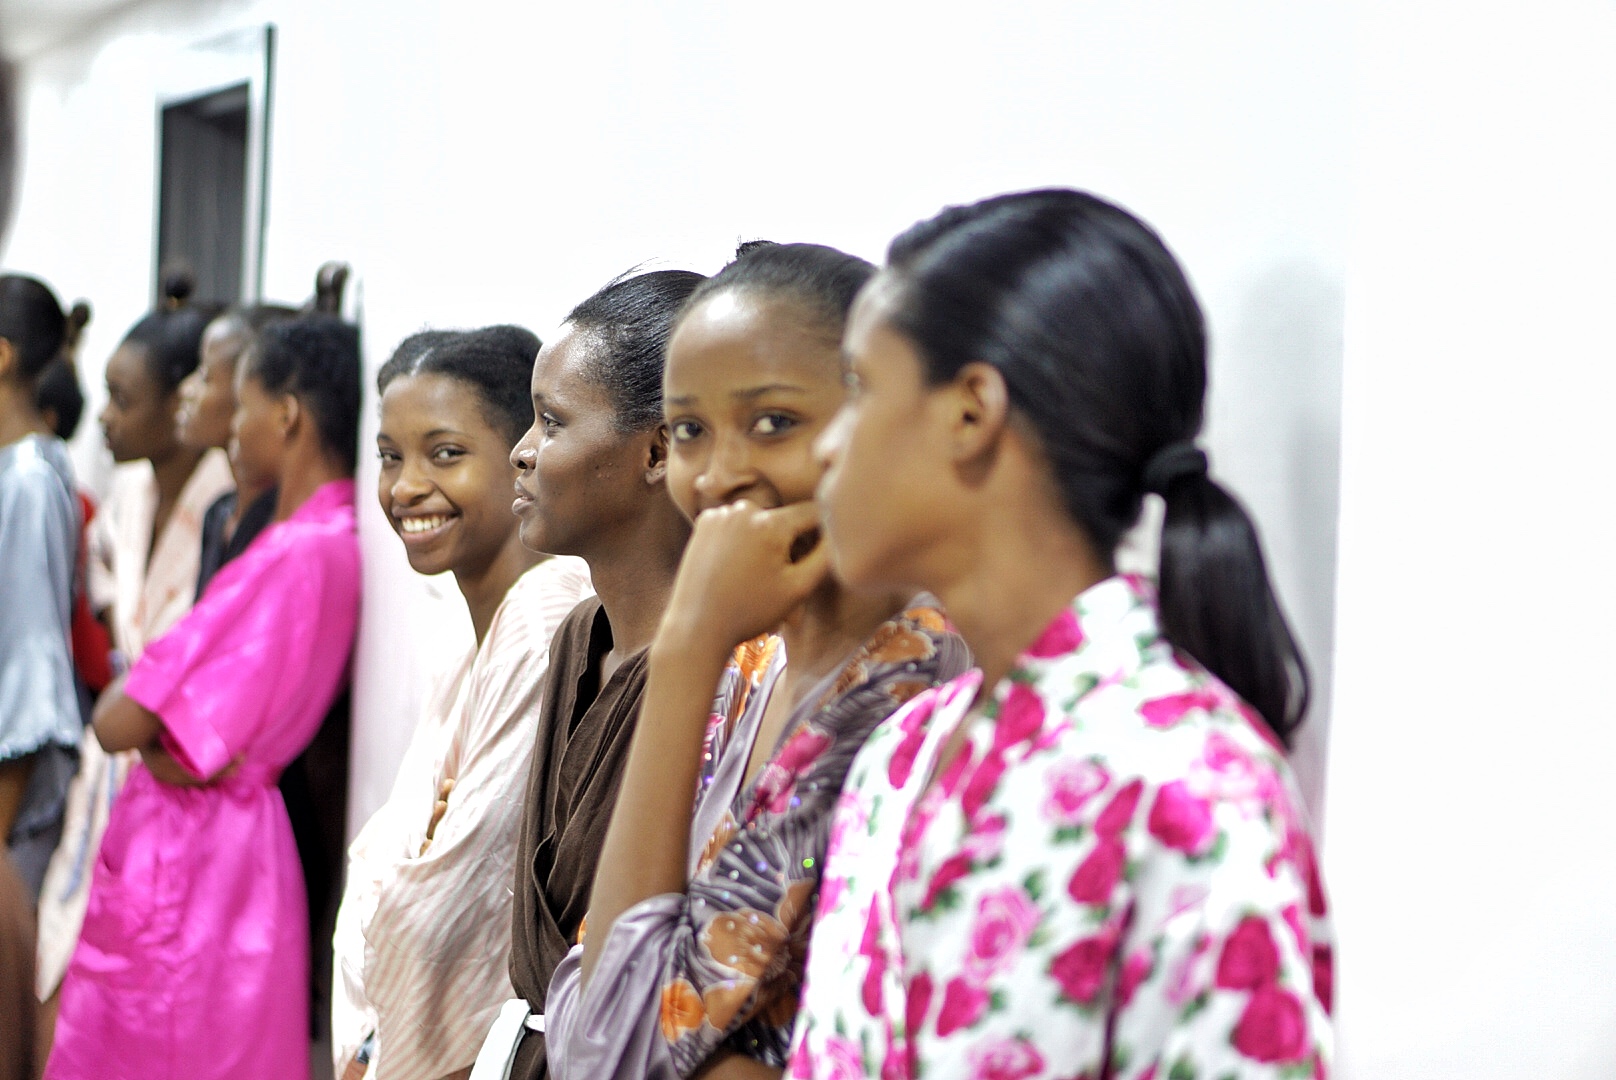 Models in tone during fittings at gtbank fashion weekend 2017